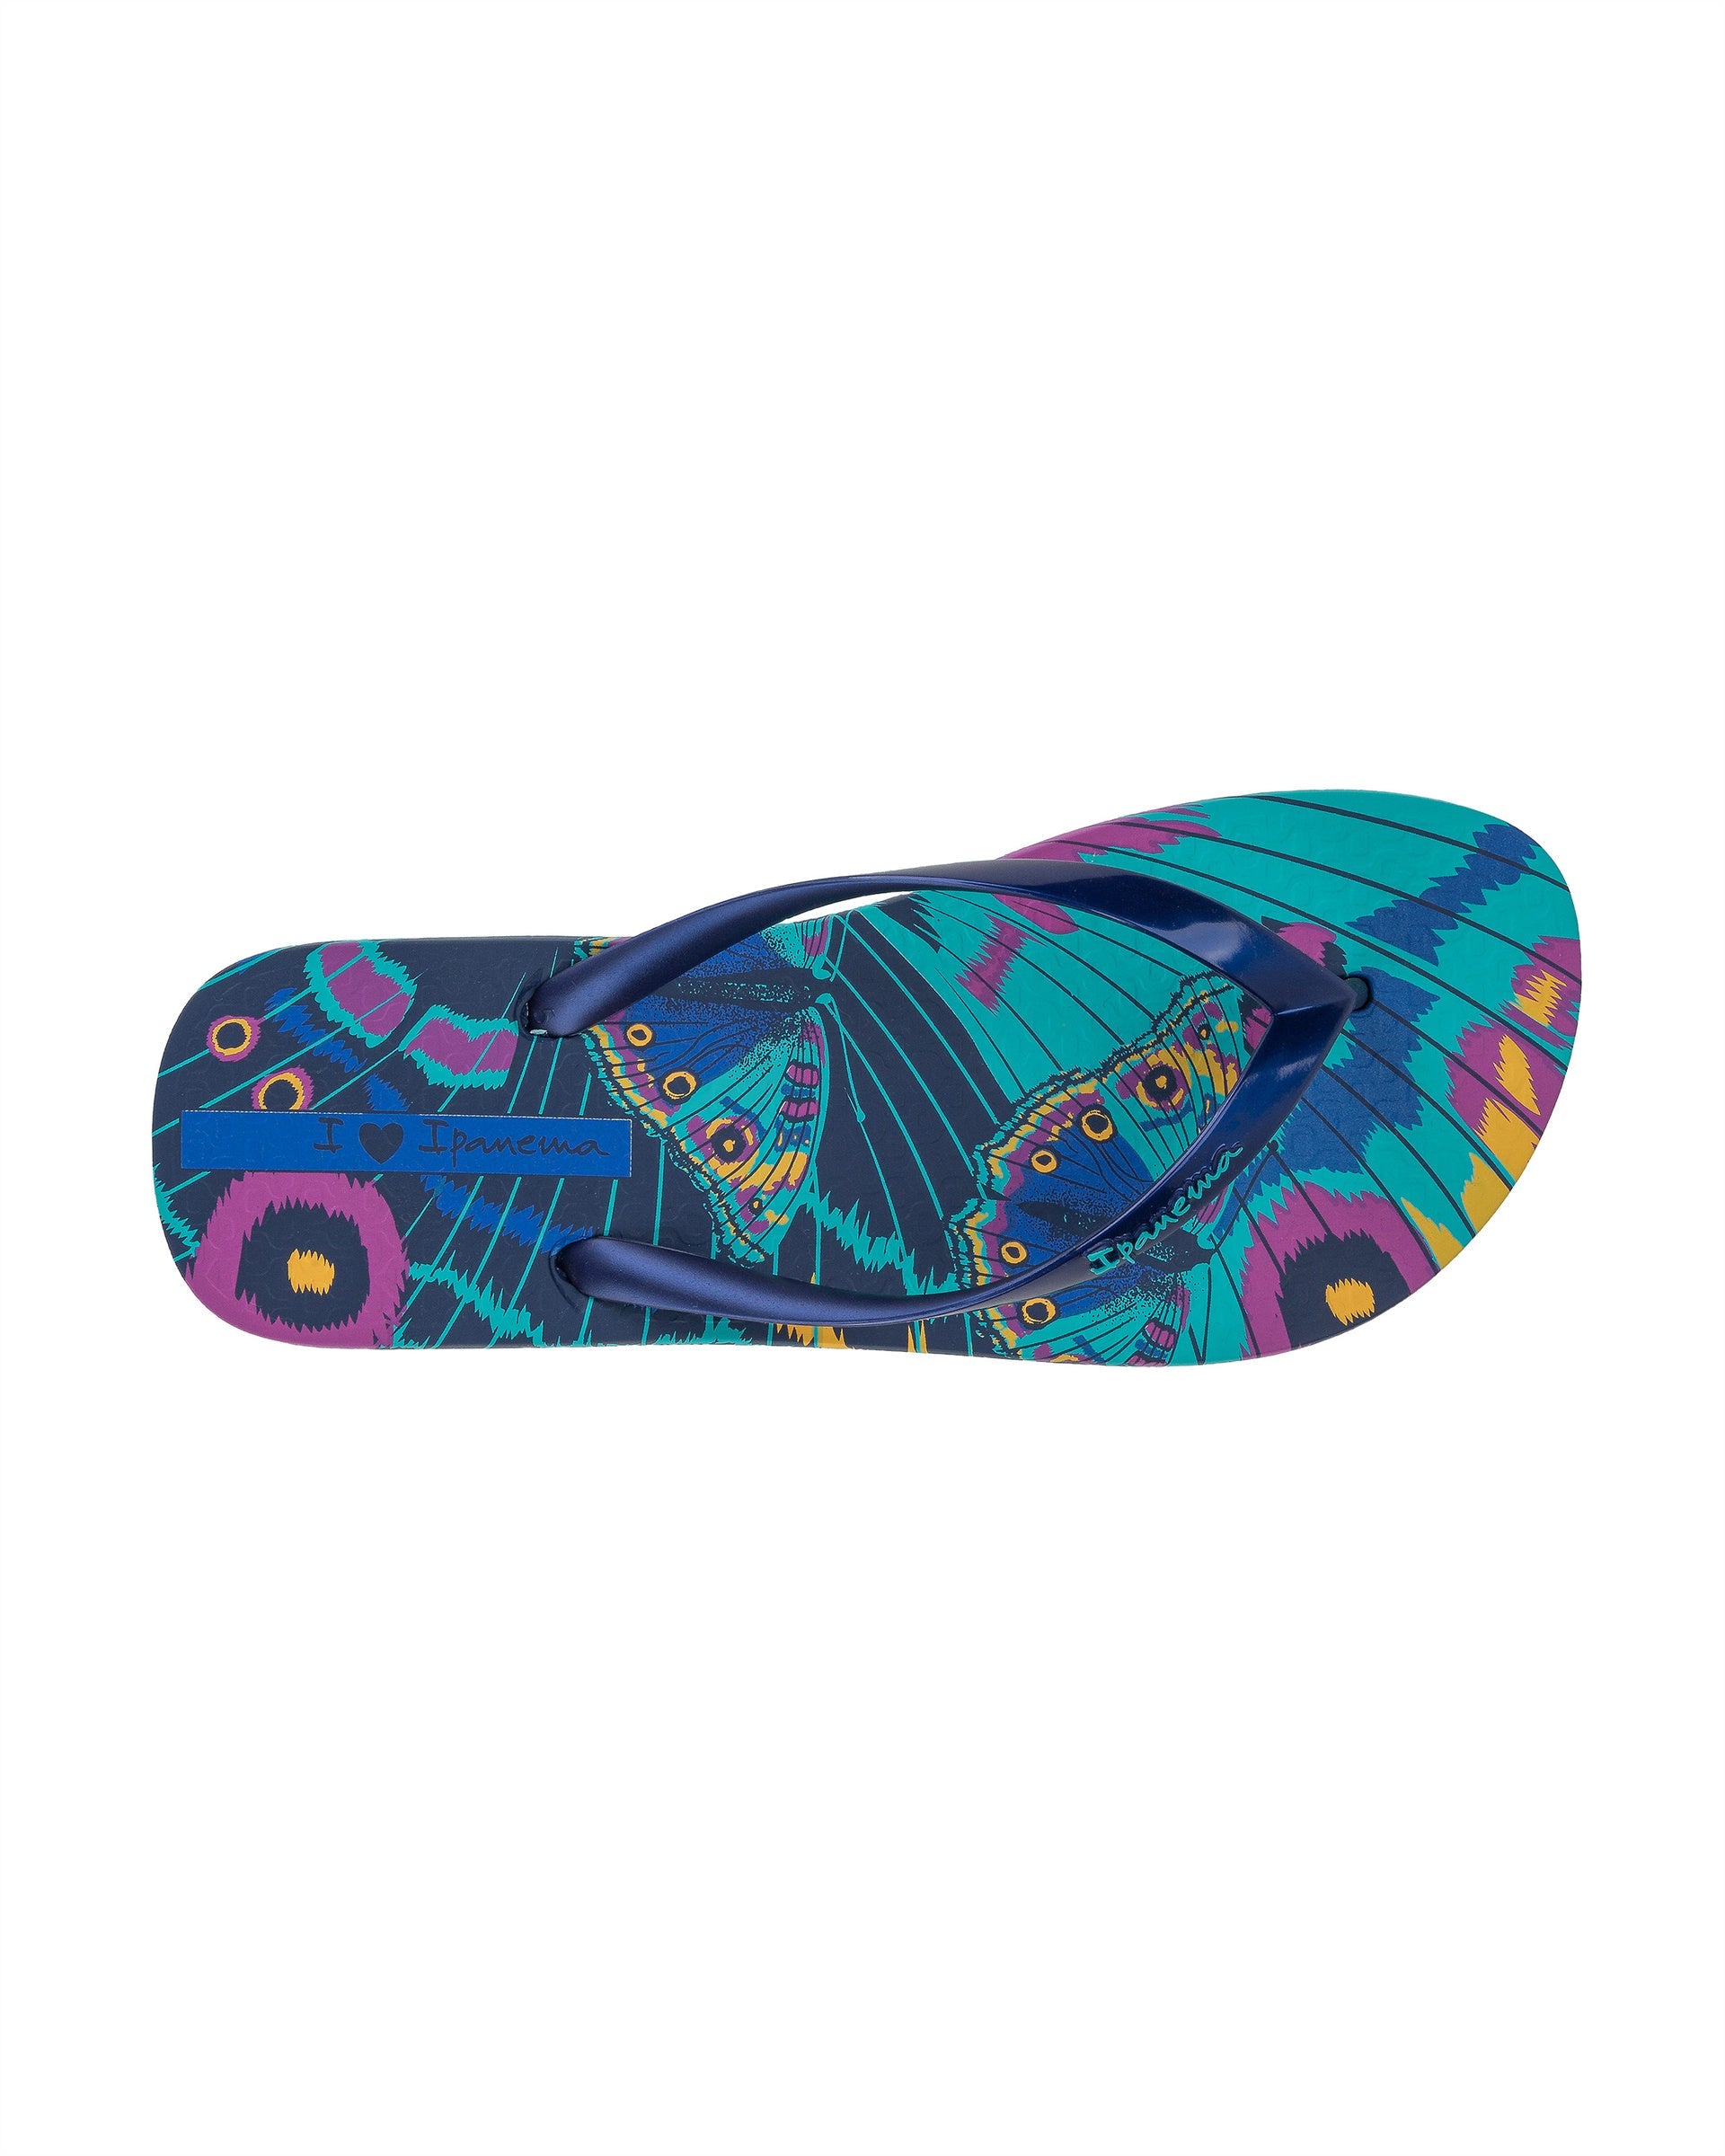 Top view of a blue Ipanema Animal Print women's flip flop with glitter blue straps and butterfly sole print.